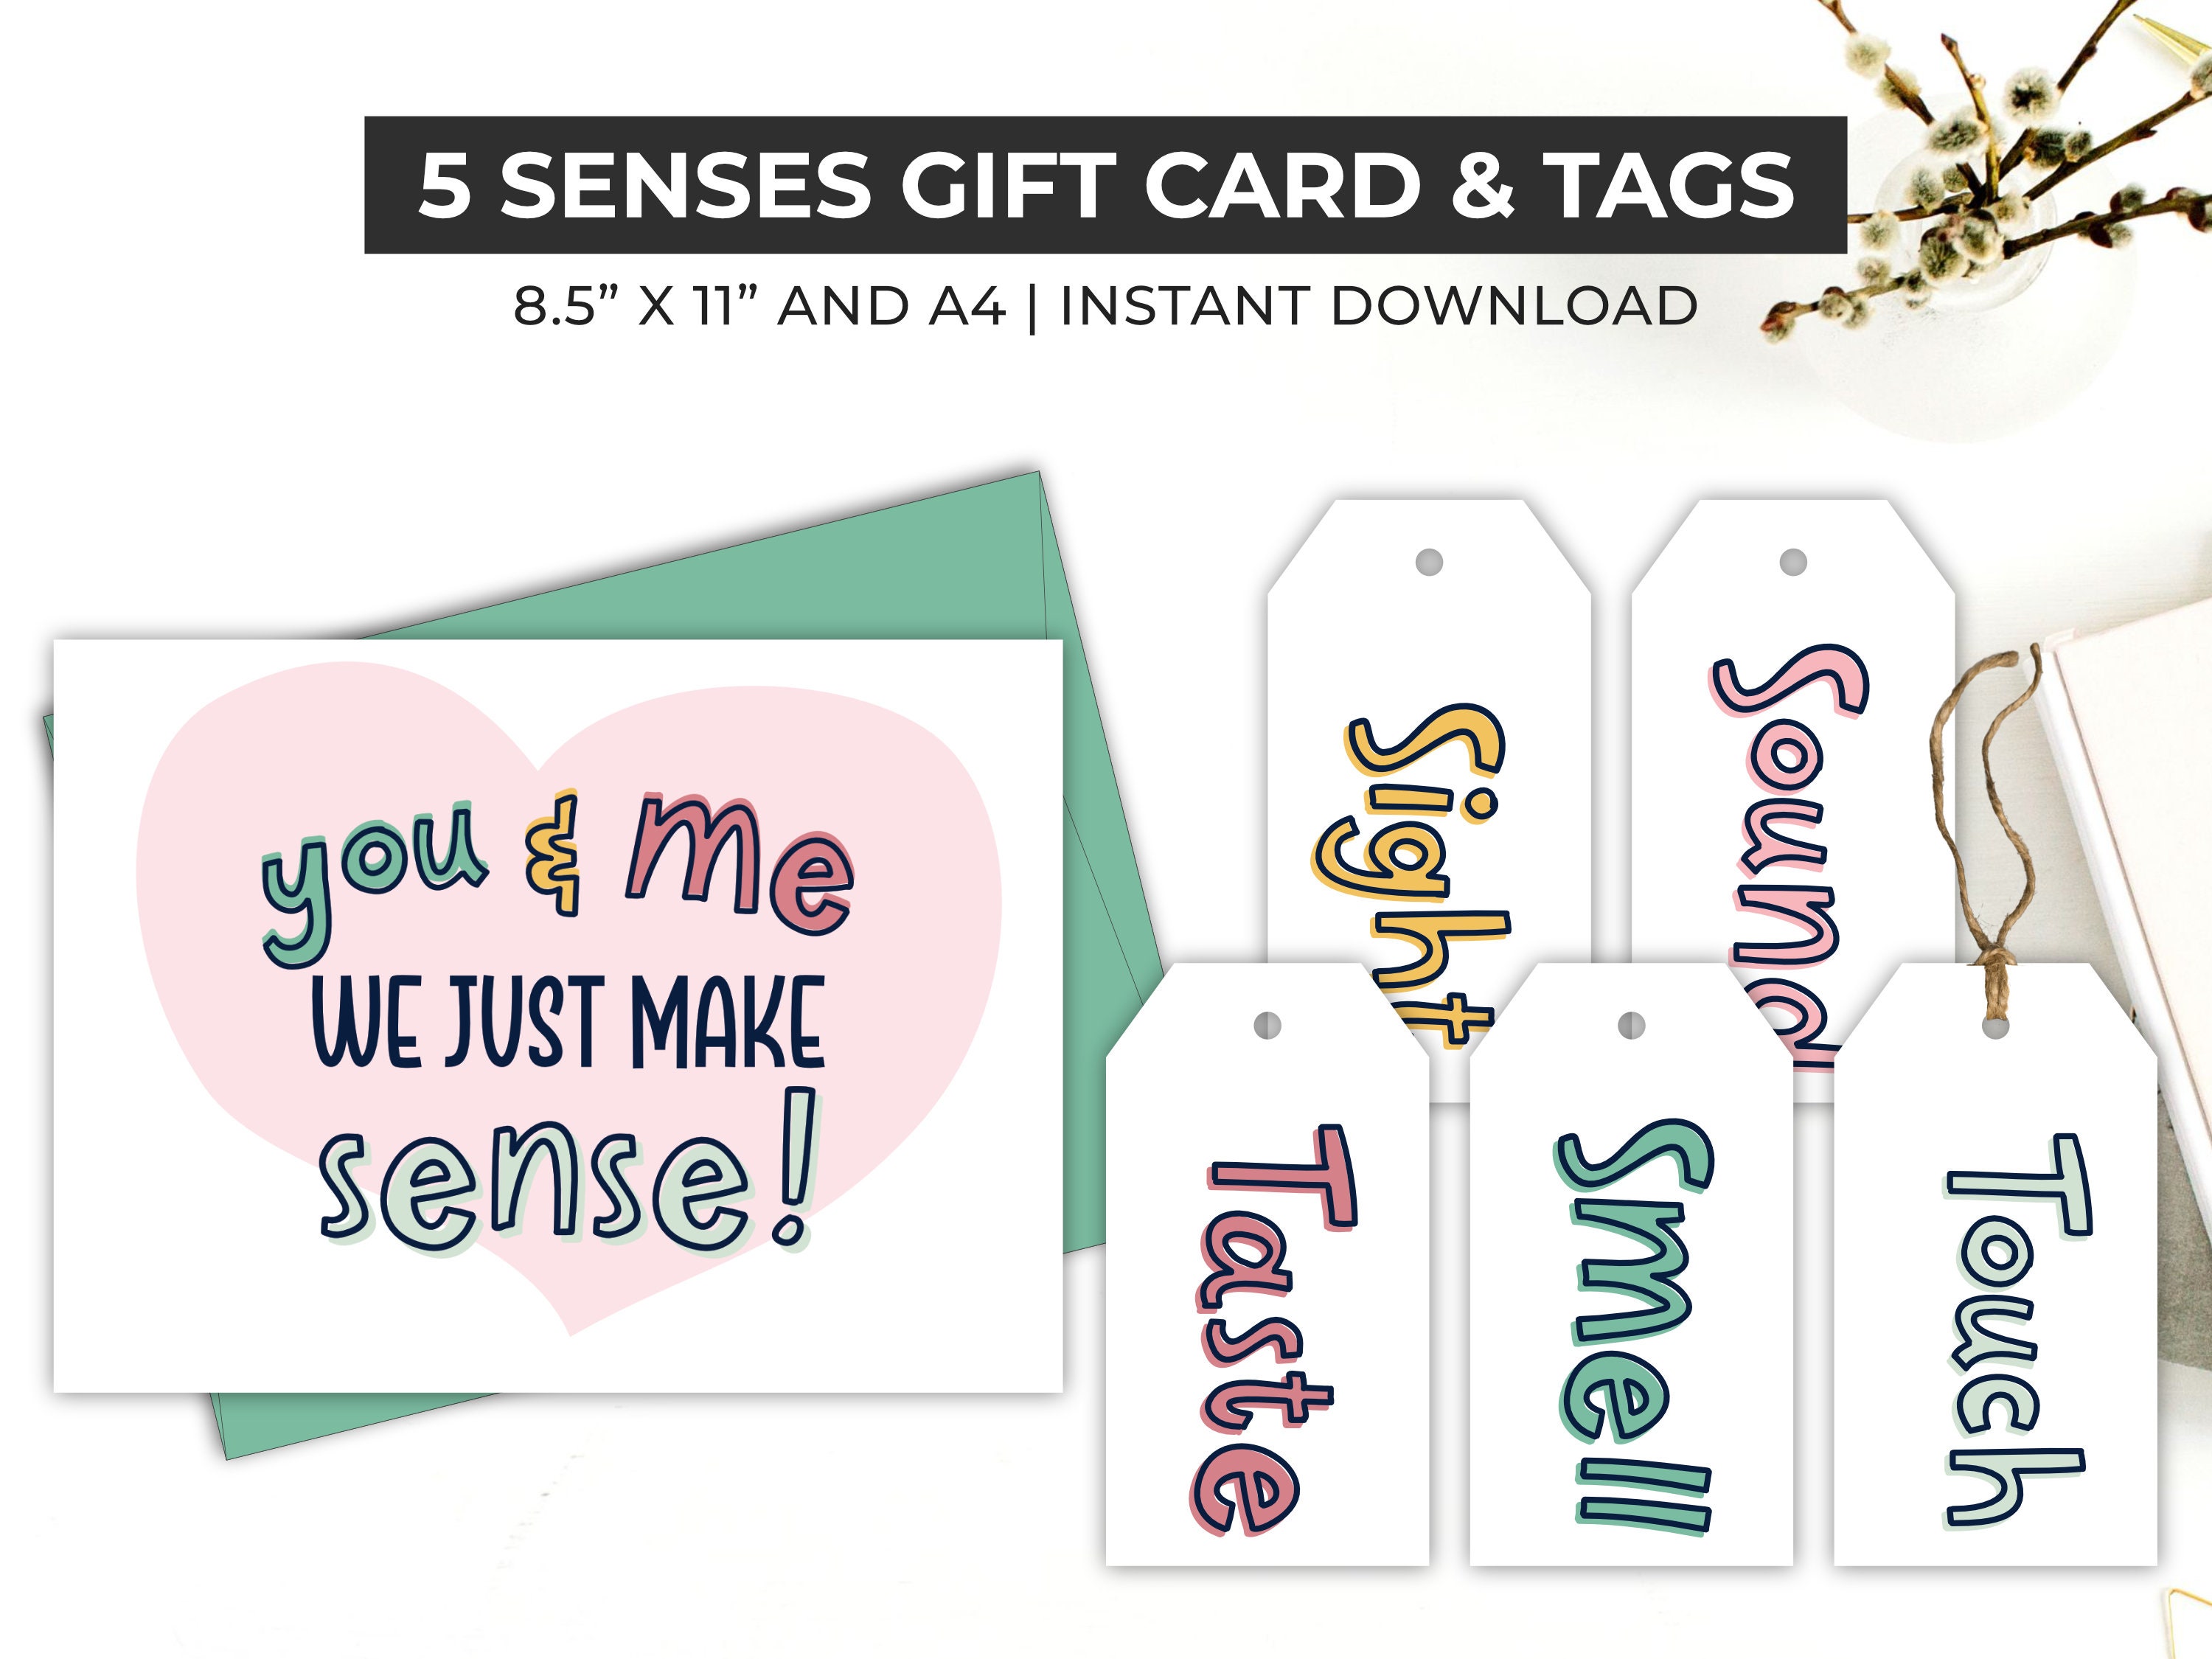 5 Senses Gift Tags & Card. Date Night Idea. Five Senses Instant Download  Printable. Birthday. Christmas Gift for Him Her. Valentine's Love. 